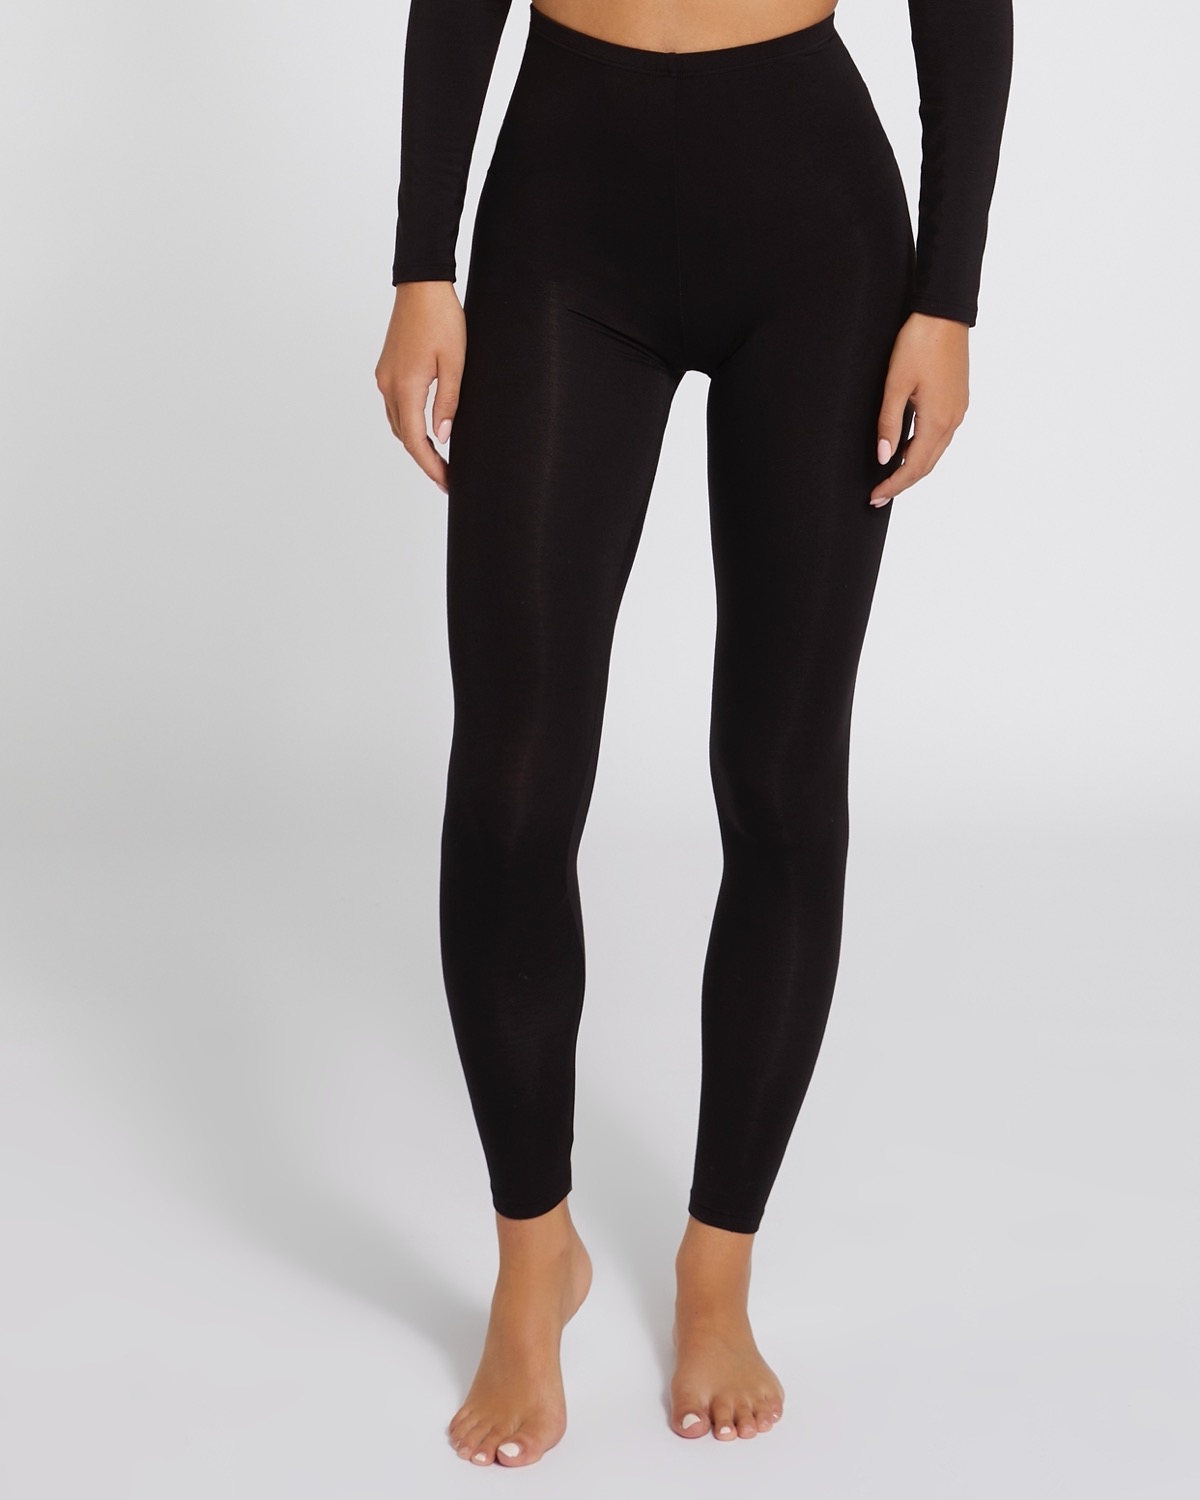 Dunnes Stores | Black Thermal Heat Activate Extra Warmth Leggings